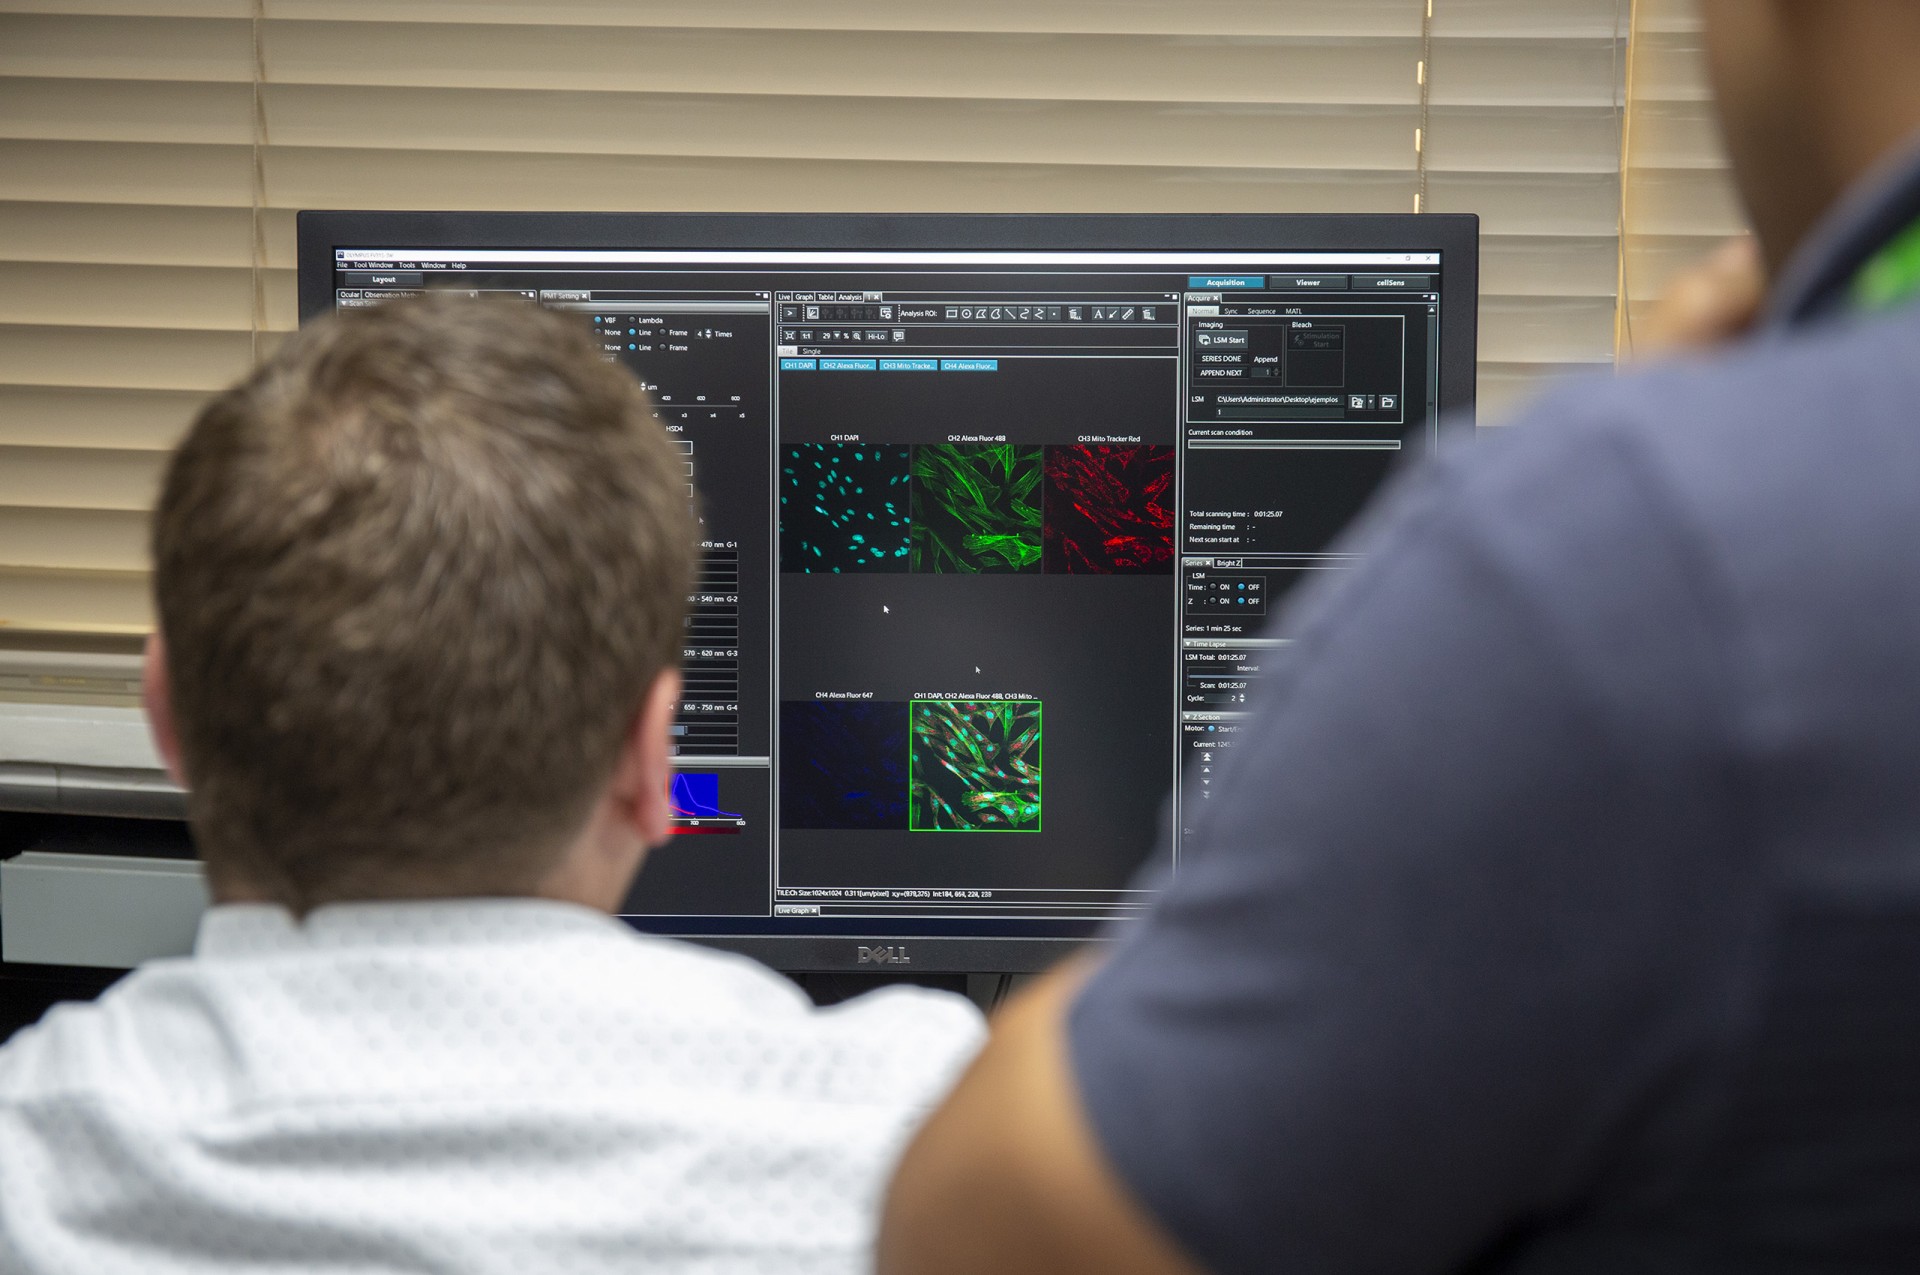 STRI has a new Laser scanning confocal microscope